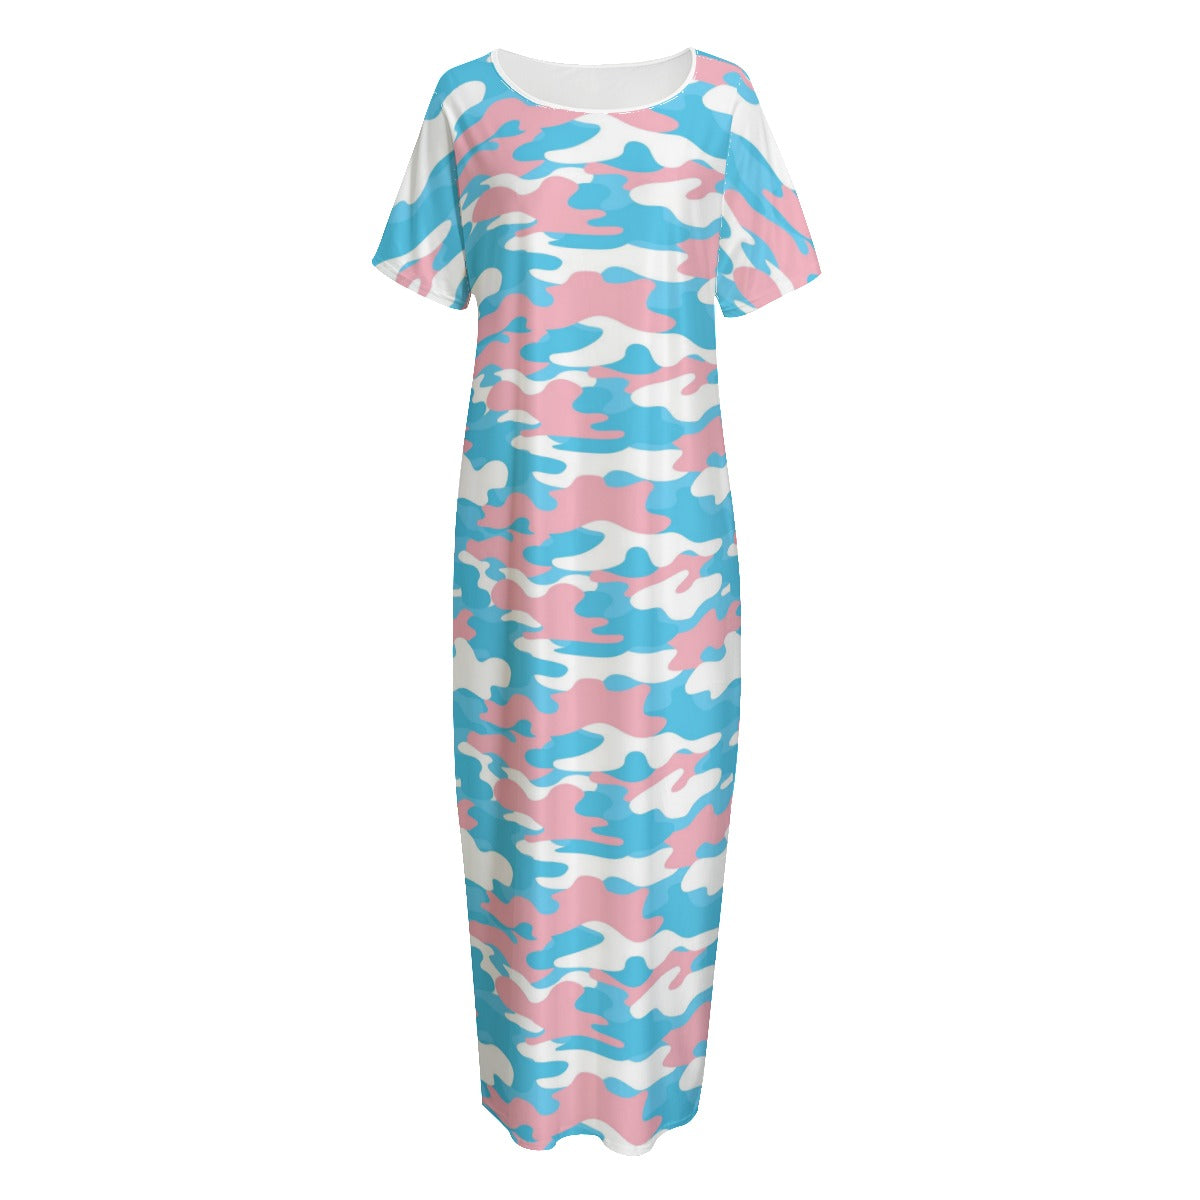 Trans Coloured Trans Pride Camouflage Long T-Shirt Style Nightdress